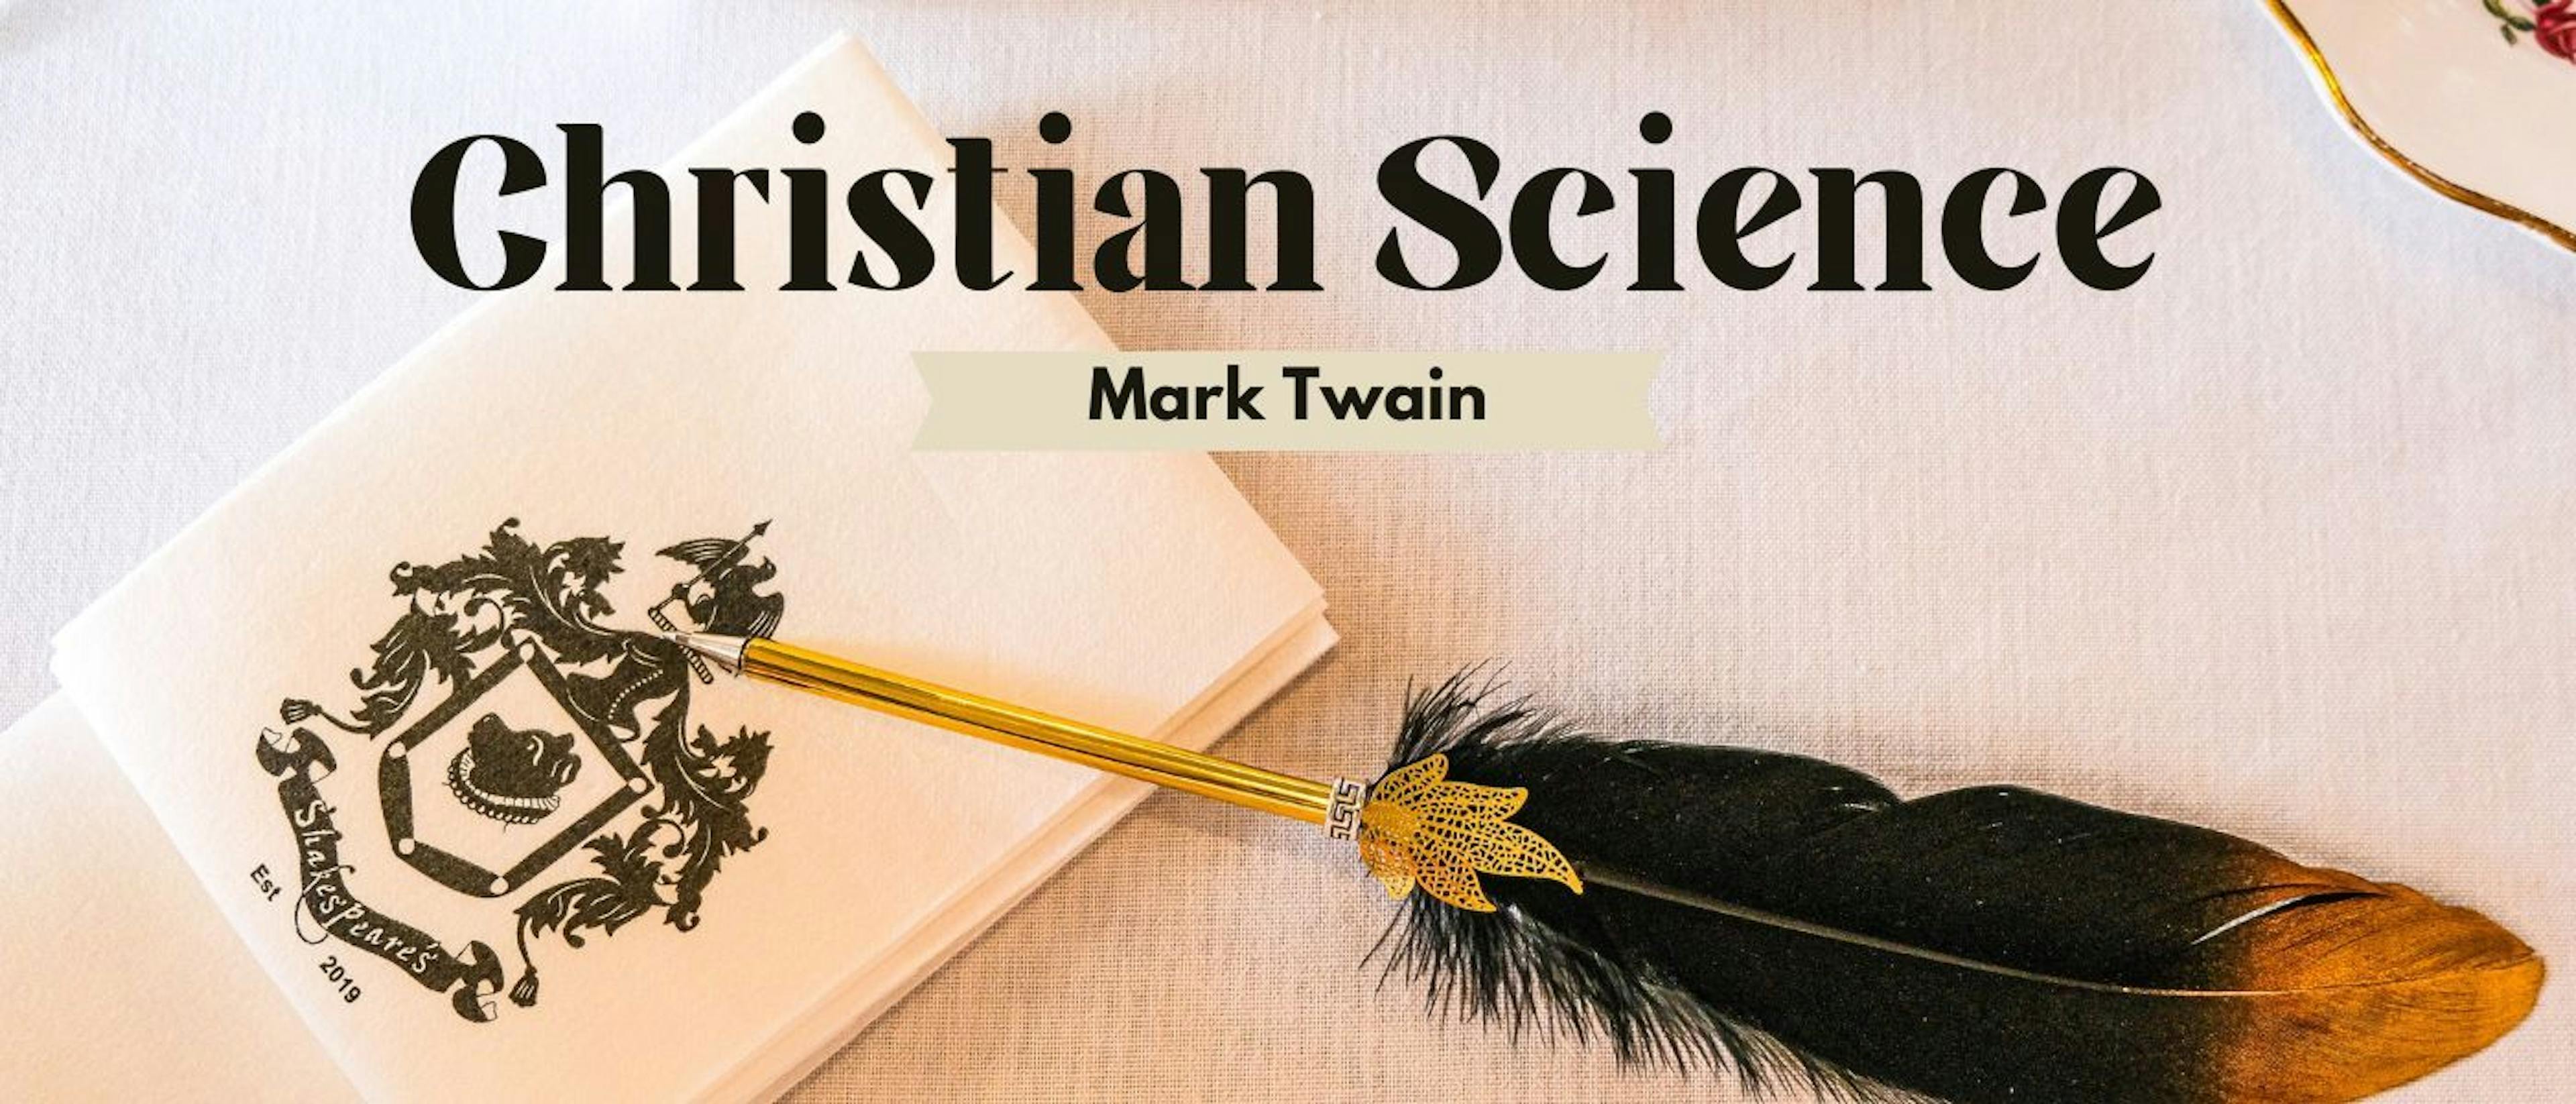 featured image - I am not playing with Christian Science and its founder, I am examining them